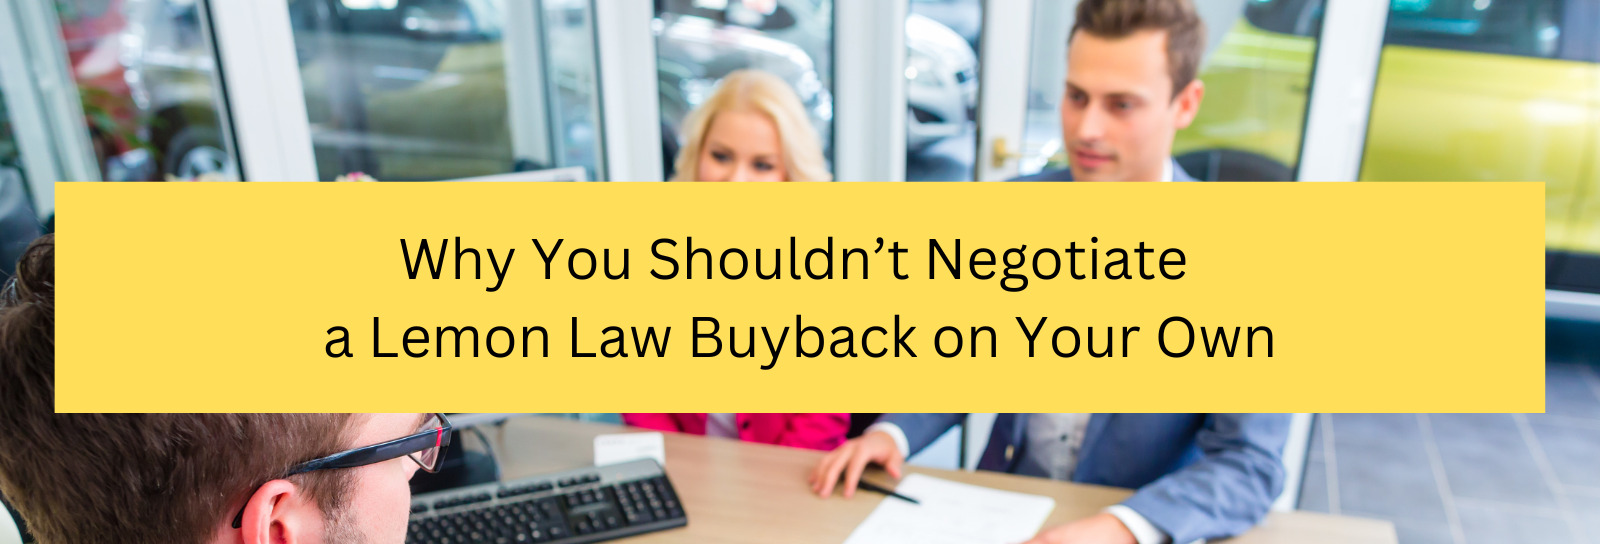 Why You Shouldn’t Negotiate a Lemon Law Buyback on Your Own